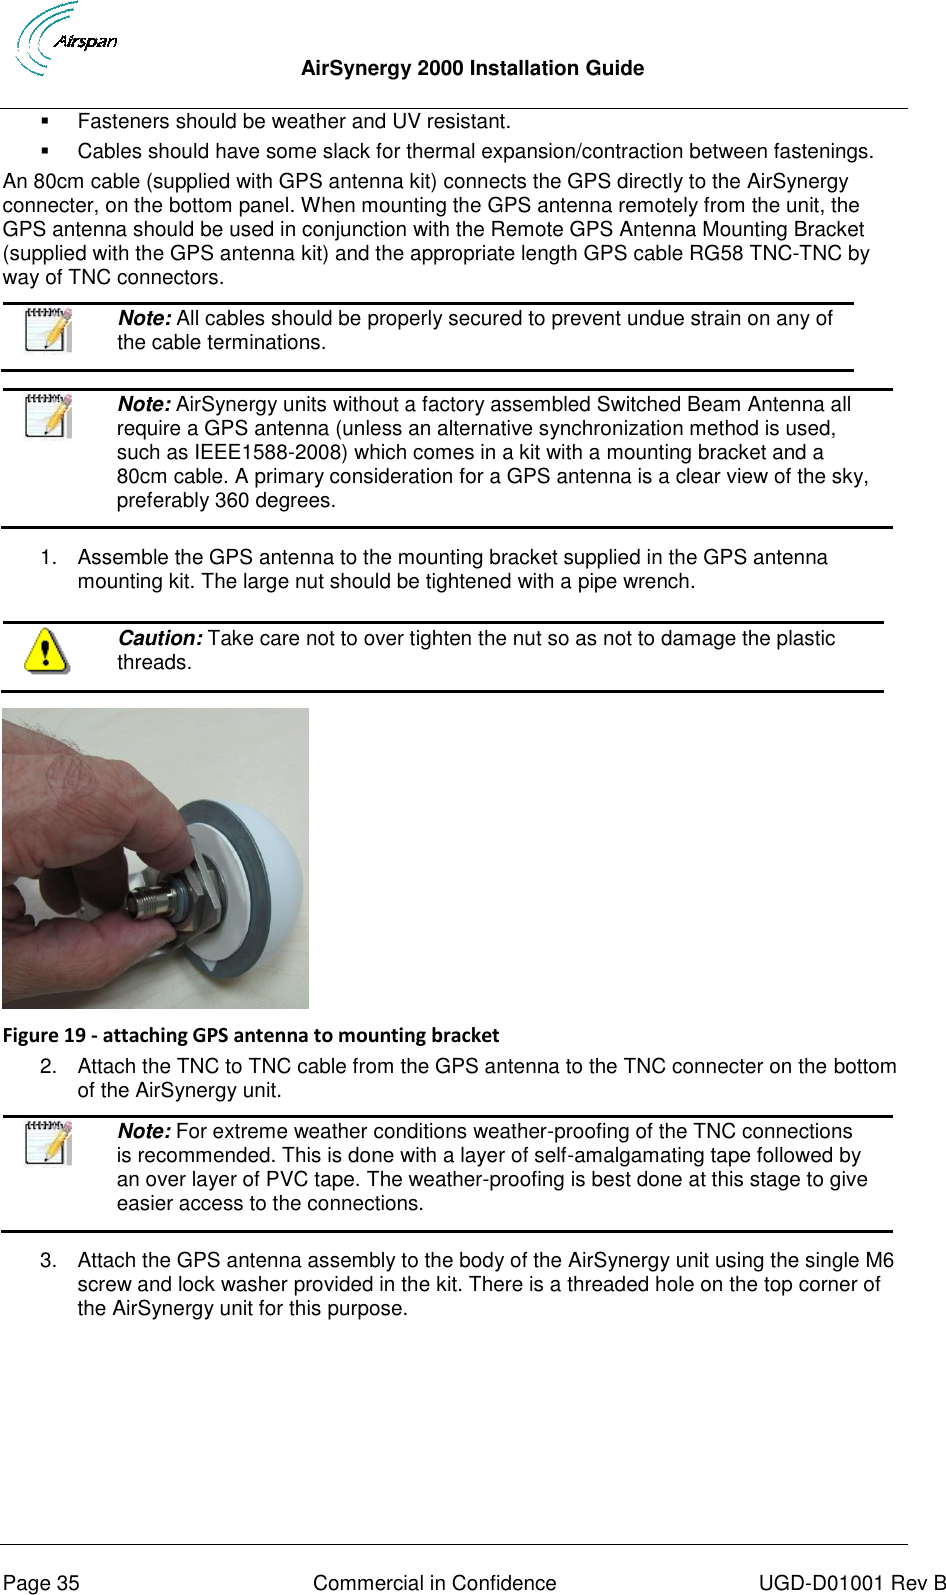  AirSynergy 2000 Installation Guide     Page 35  Commercial in Confidence  UGD-D01001 Rev B   Fasteners should be weather and UV resistant.   Cables should have some slack for thermal expansion/contraction between fastenings. An 80cm cable (supplied with GPS antenna kit) connects the GPS directly to the AirSynergy connecter, on the bottom panel. When mounting the GPS antenna remotely from the unit, the GPS antenna should be used in conjunction with the Remote GPS Antenna Mounting Bracket (supplied with the GPS antenna kit) and the appropriate length GPS cable RG58 TNC-TNC by way of TNC connectors.  Note: All cables should be properly secured to prevent undue strain on any of the cable terminations.     Note: AirSynergy units without a factory assembled Switched Beam Antenna all require a GPS antenna (unless an alternative synchronization method is used, such as IEEE1588-2008) which comes in a kit with a mounting bracket and a 80cm cable. A primary consideration for a GPS antenna is a clear view of the sky, preferably 360 degrees.  1.  Assemble the GPS antenna to the mounting bracket supplied in the GPS antenna mounting kit. The large nut should be tightened with a pipe wrench.   Caution: Take care not to over tighten the nut so as not to damage the plastic threads.    Figure 19 - attaching GPS antenna to mounting bracket 2.  Attach the TNC to TNC cable from the GPS antenna to the TNC connecter on the bottom of the AirSynergy unit.   Note: For extreme weather conditions weather-proofing of the TNC connections is recommended. This is done with a layer of self-amalgamating tape followed by an over layer of PVC tape. The weather-proofing is best done at this stage to give easier access to the connections.  3.  Attach the GPS antenna assembly to the body of the AirSynergy unit using the single M6 screw and lock washer provided in the kit. There is a threaded hole on the top corner of the AirSynergy unit for this purpose. 